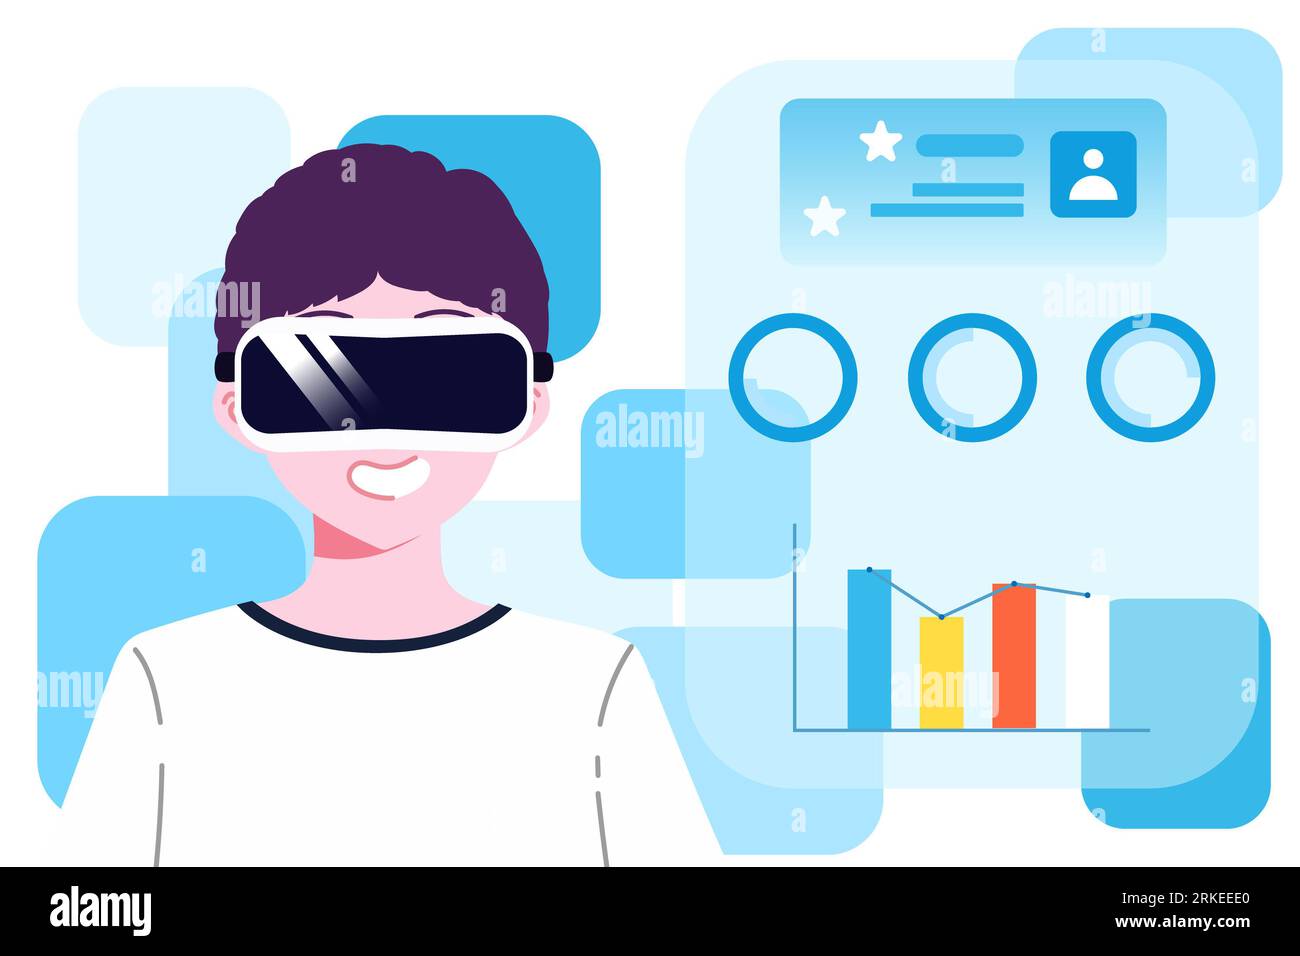 A young man character wearing virtual reality headset experiencing on futuristic interface 3D world. Young people entering virtual simulation. Stock Photo